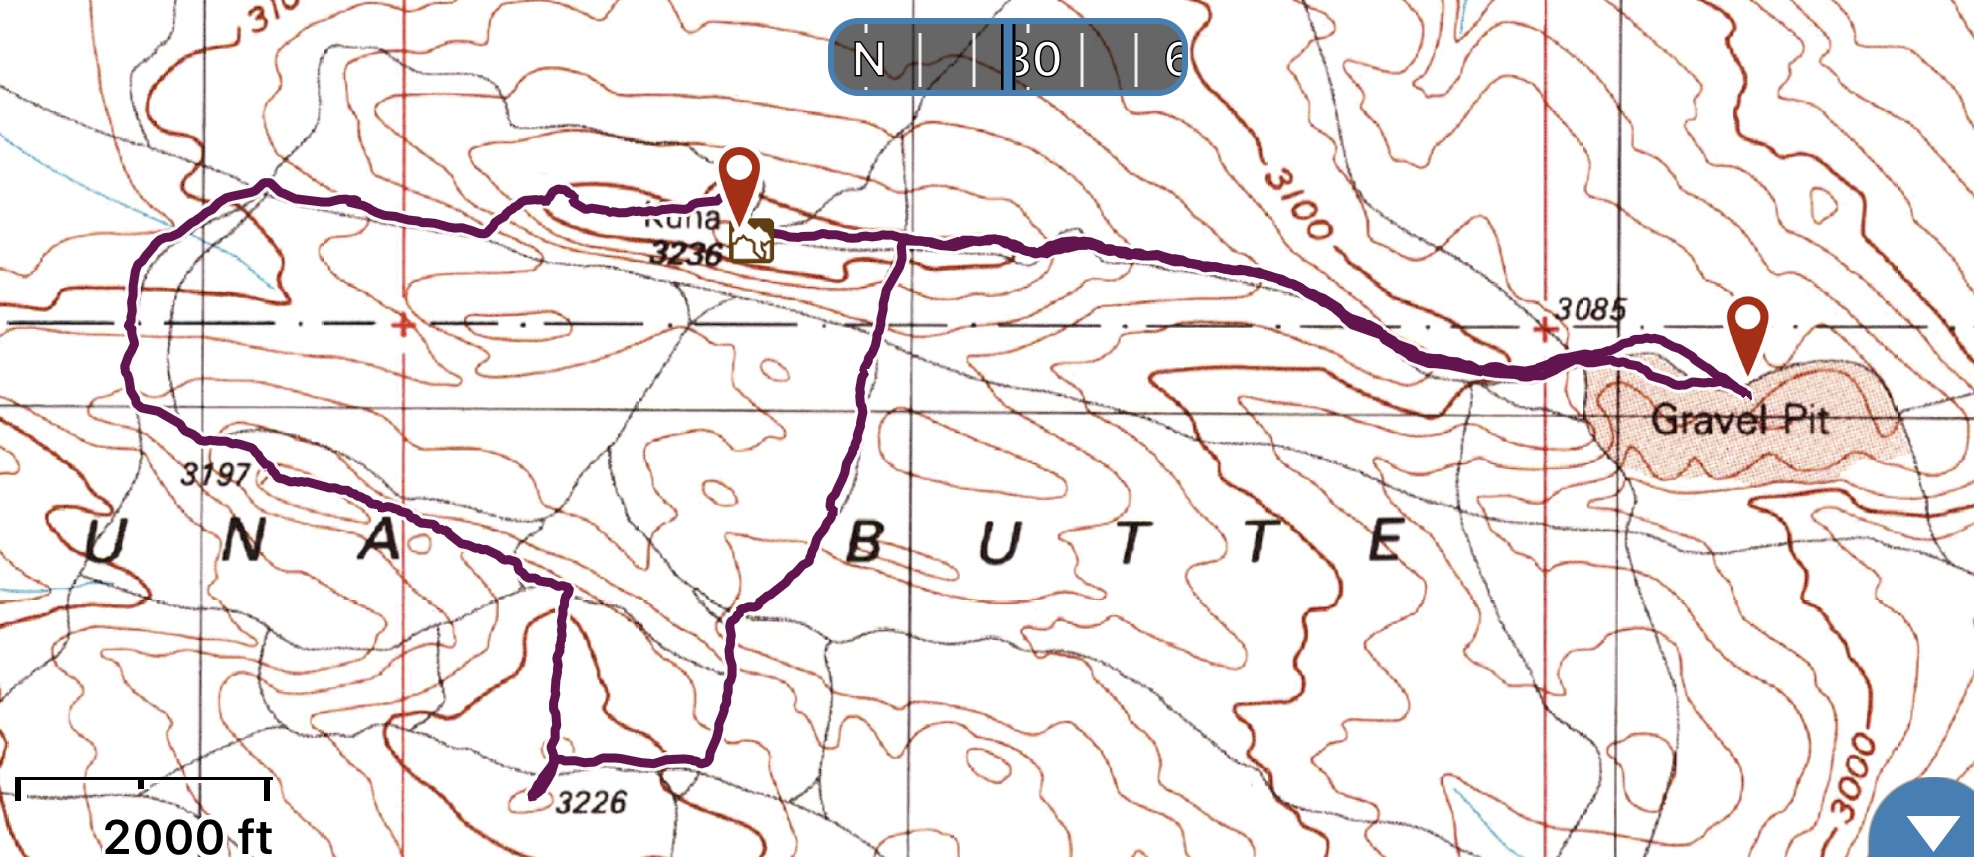 This is a GPS track of a 4.0 mile December 2017 hike which demonstrates that you can put in some decent miles hiking around the butte’s slopes.